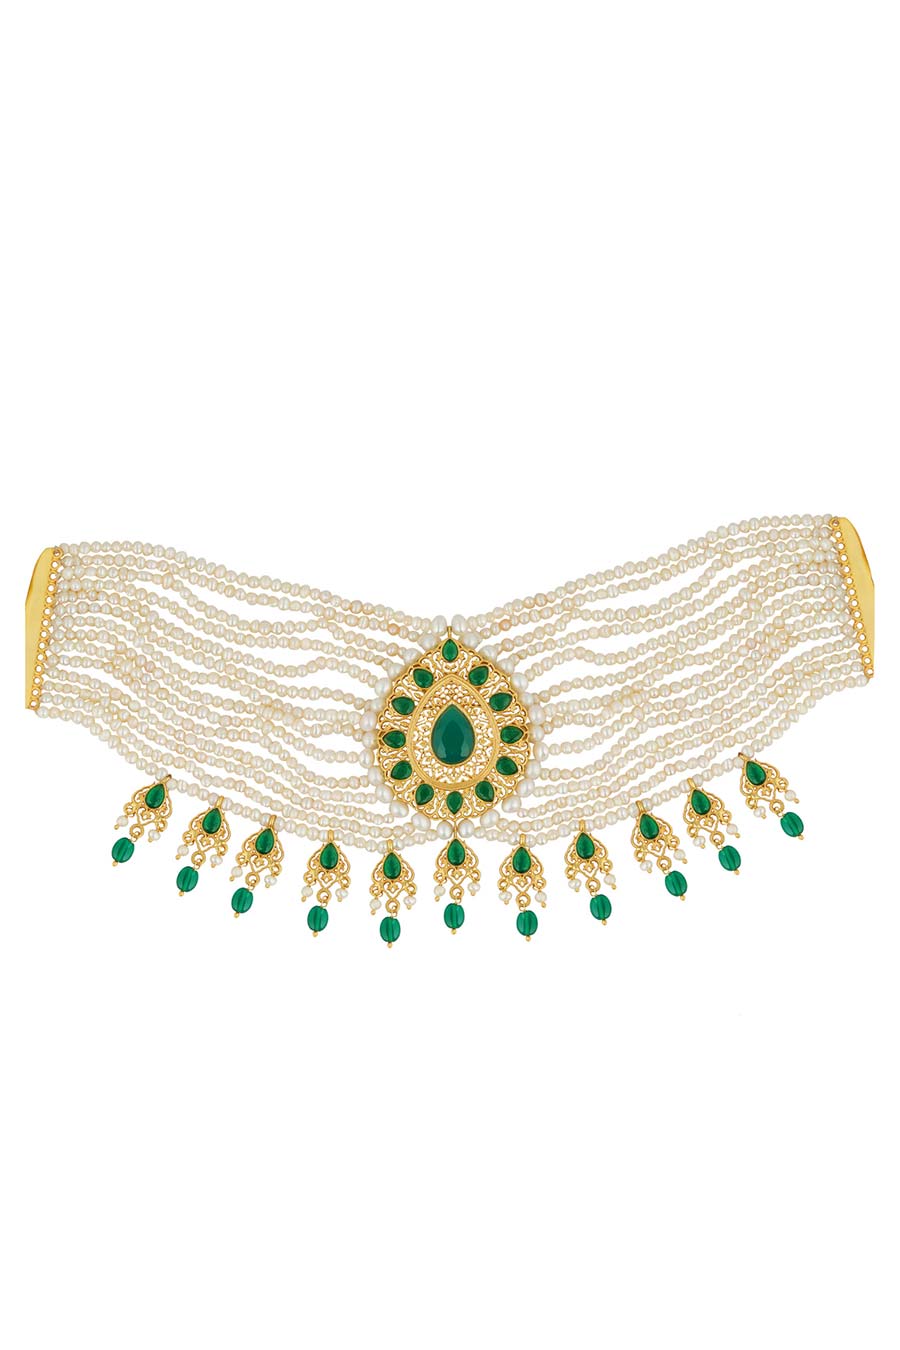 Sultana Gold Plated Necklace